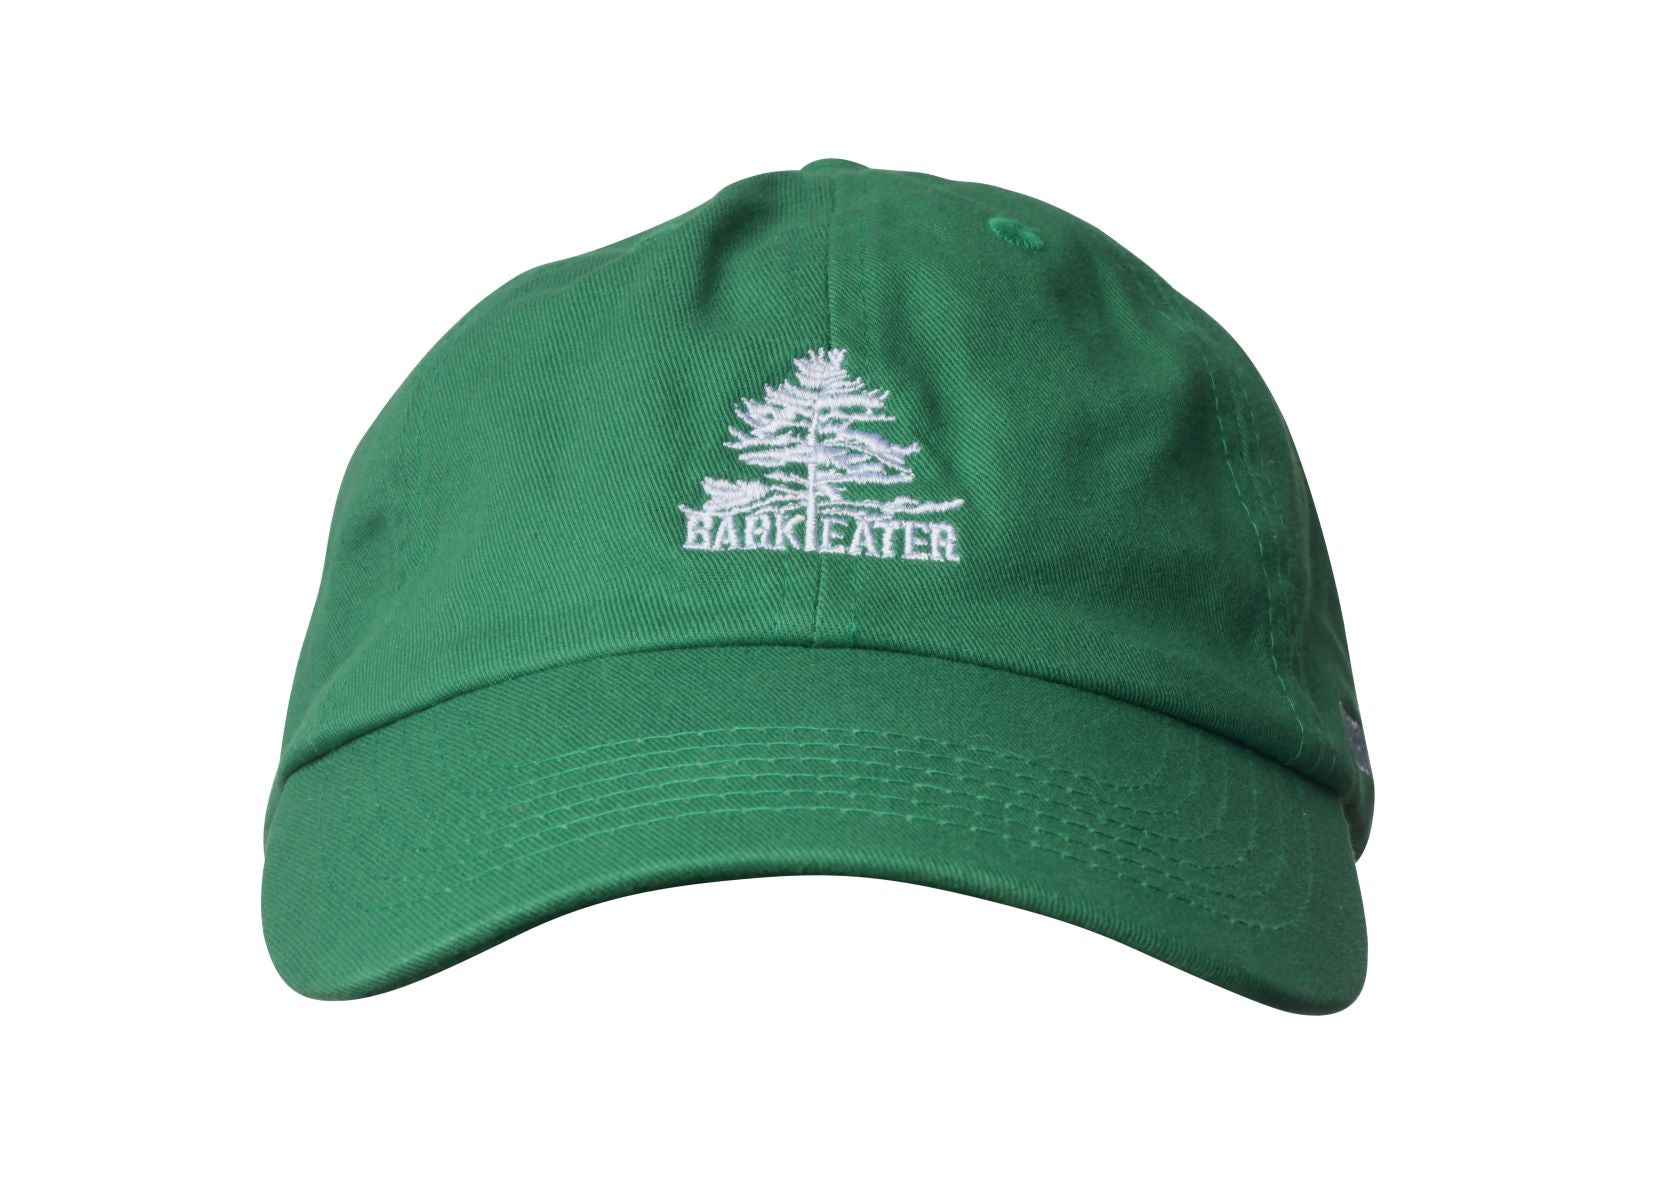 The Bark Eater Cotton Hat